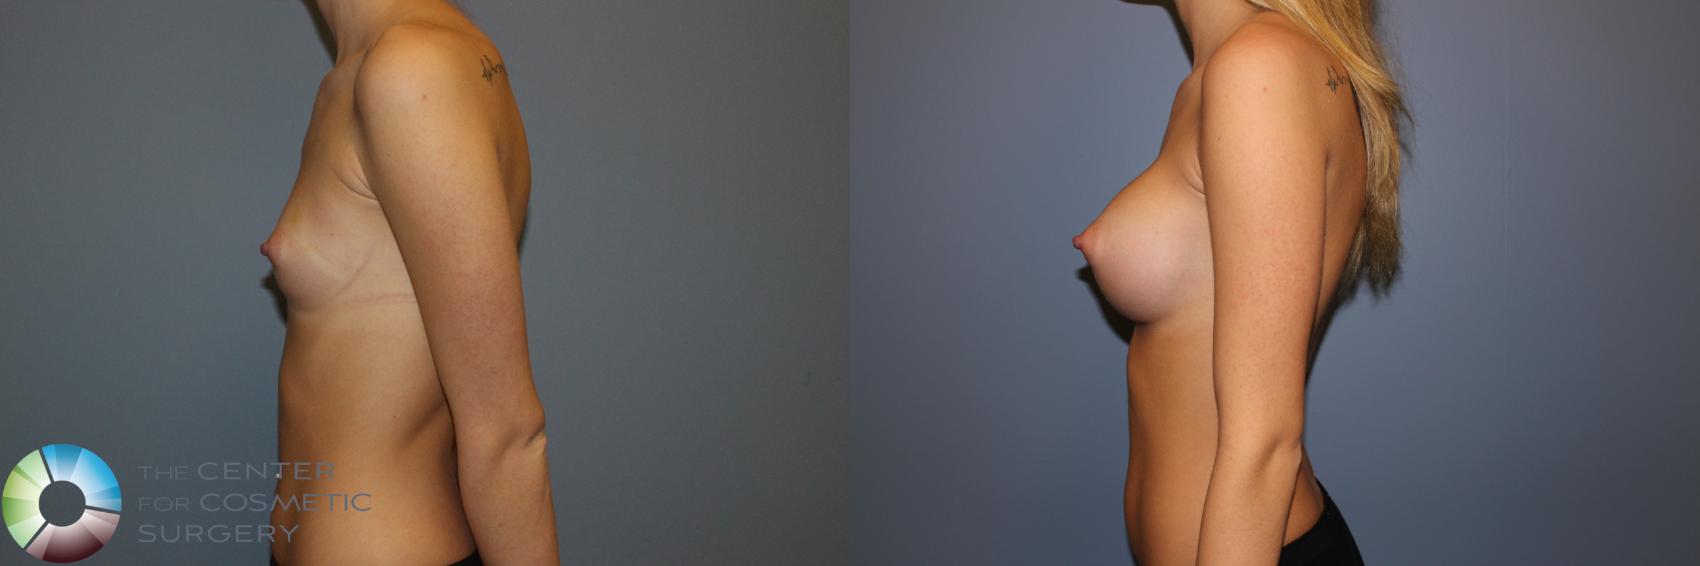 Before & After Breast Augmentation Case 11528 Left Side View in Golden, CO